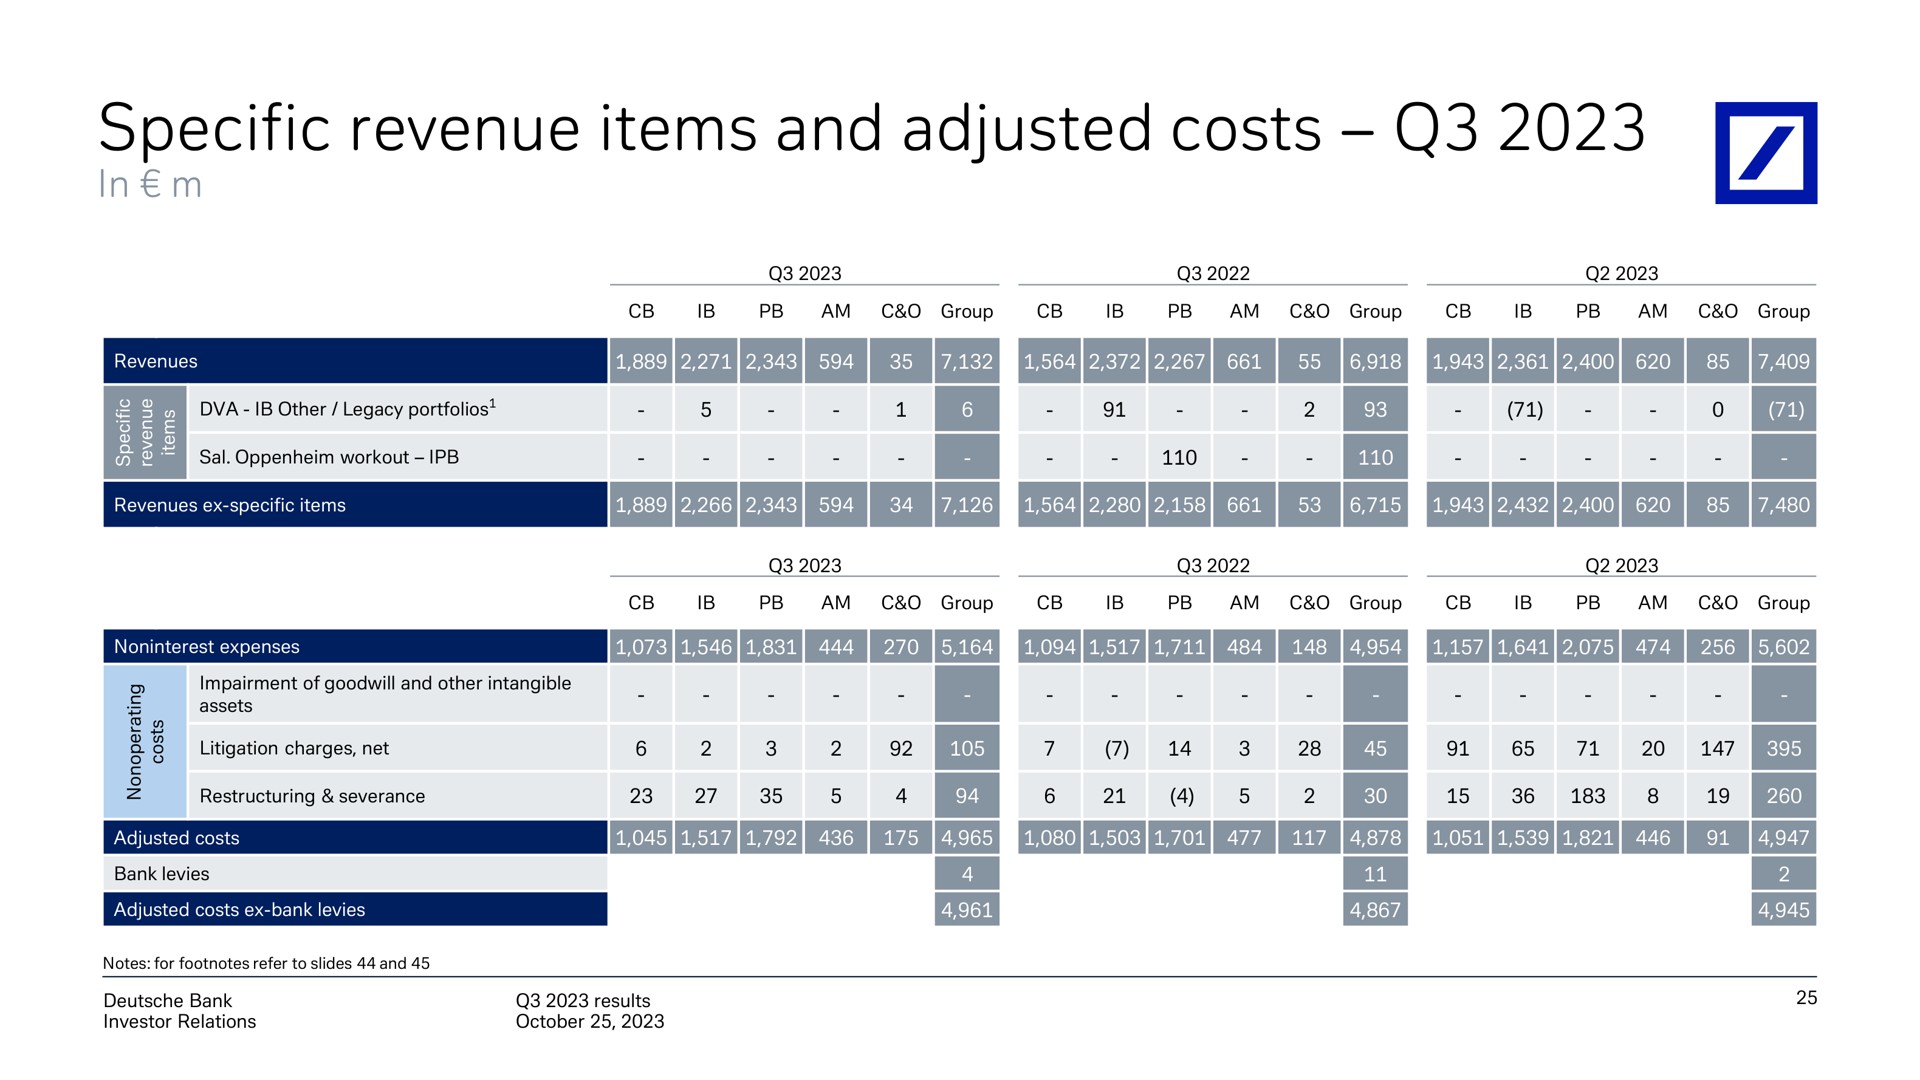 specific revenue items and adjusted costs | Deutsche Bank